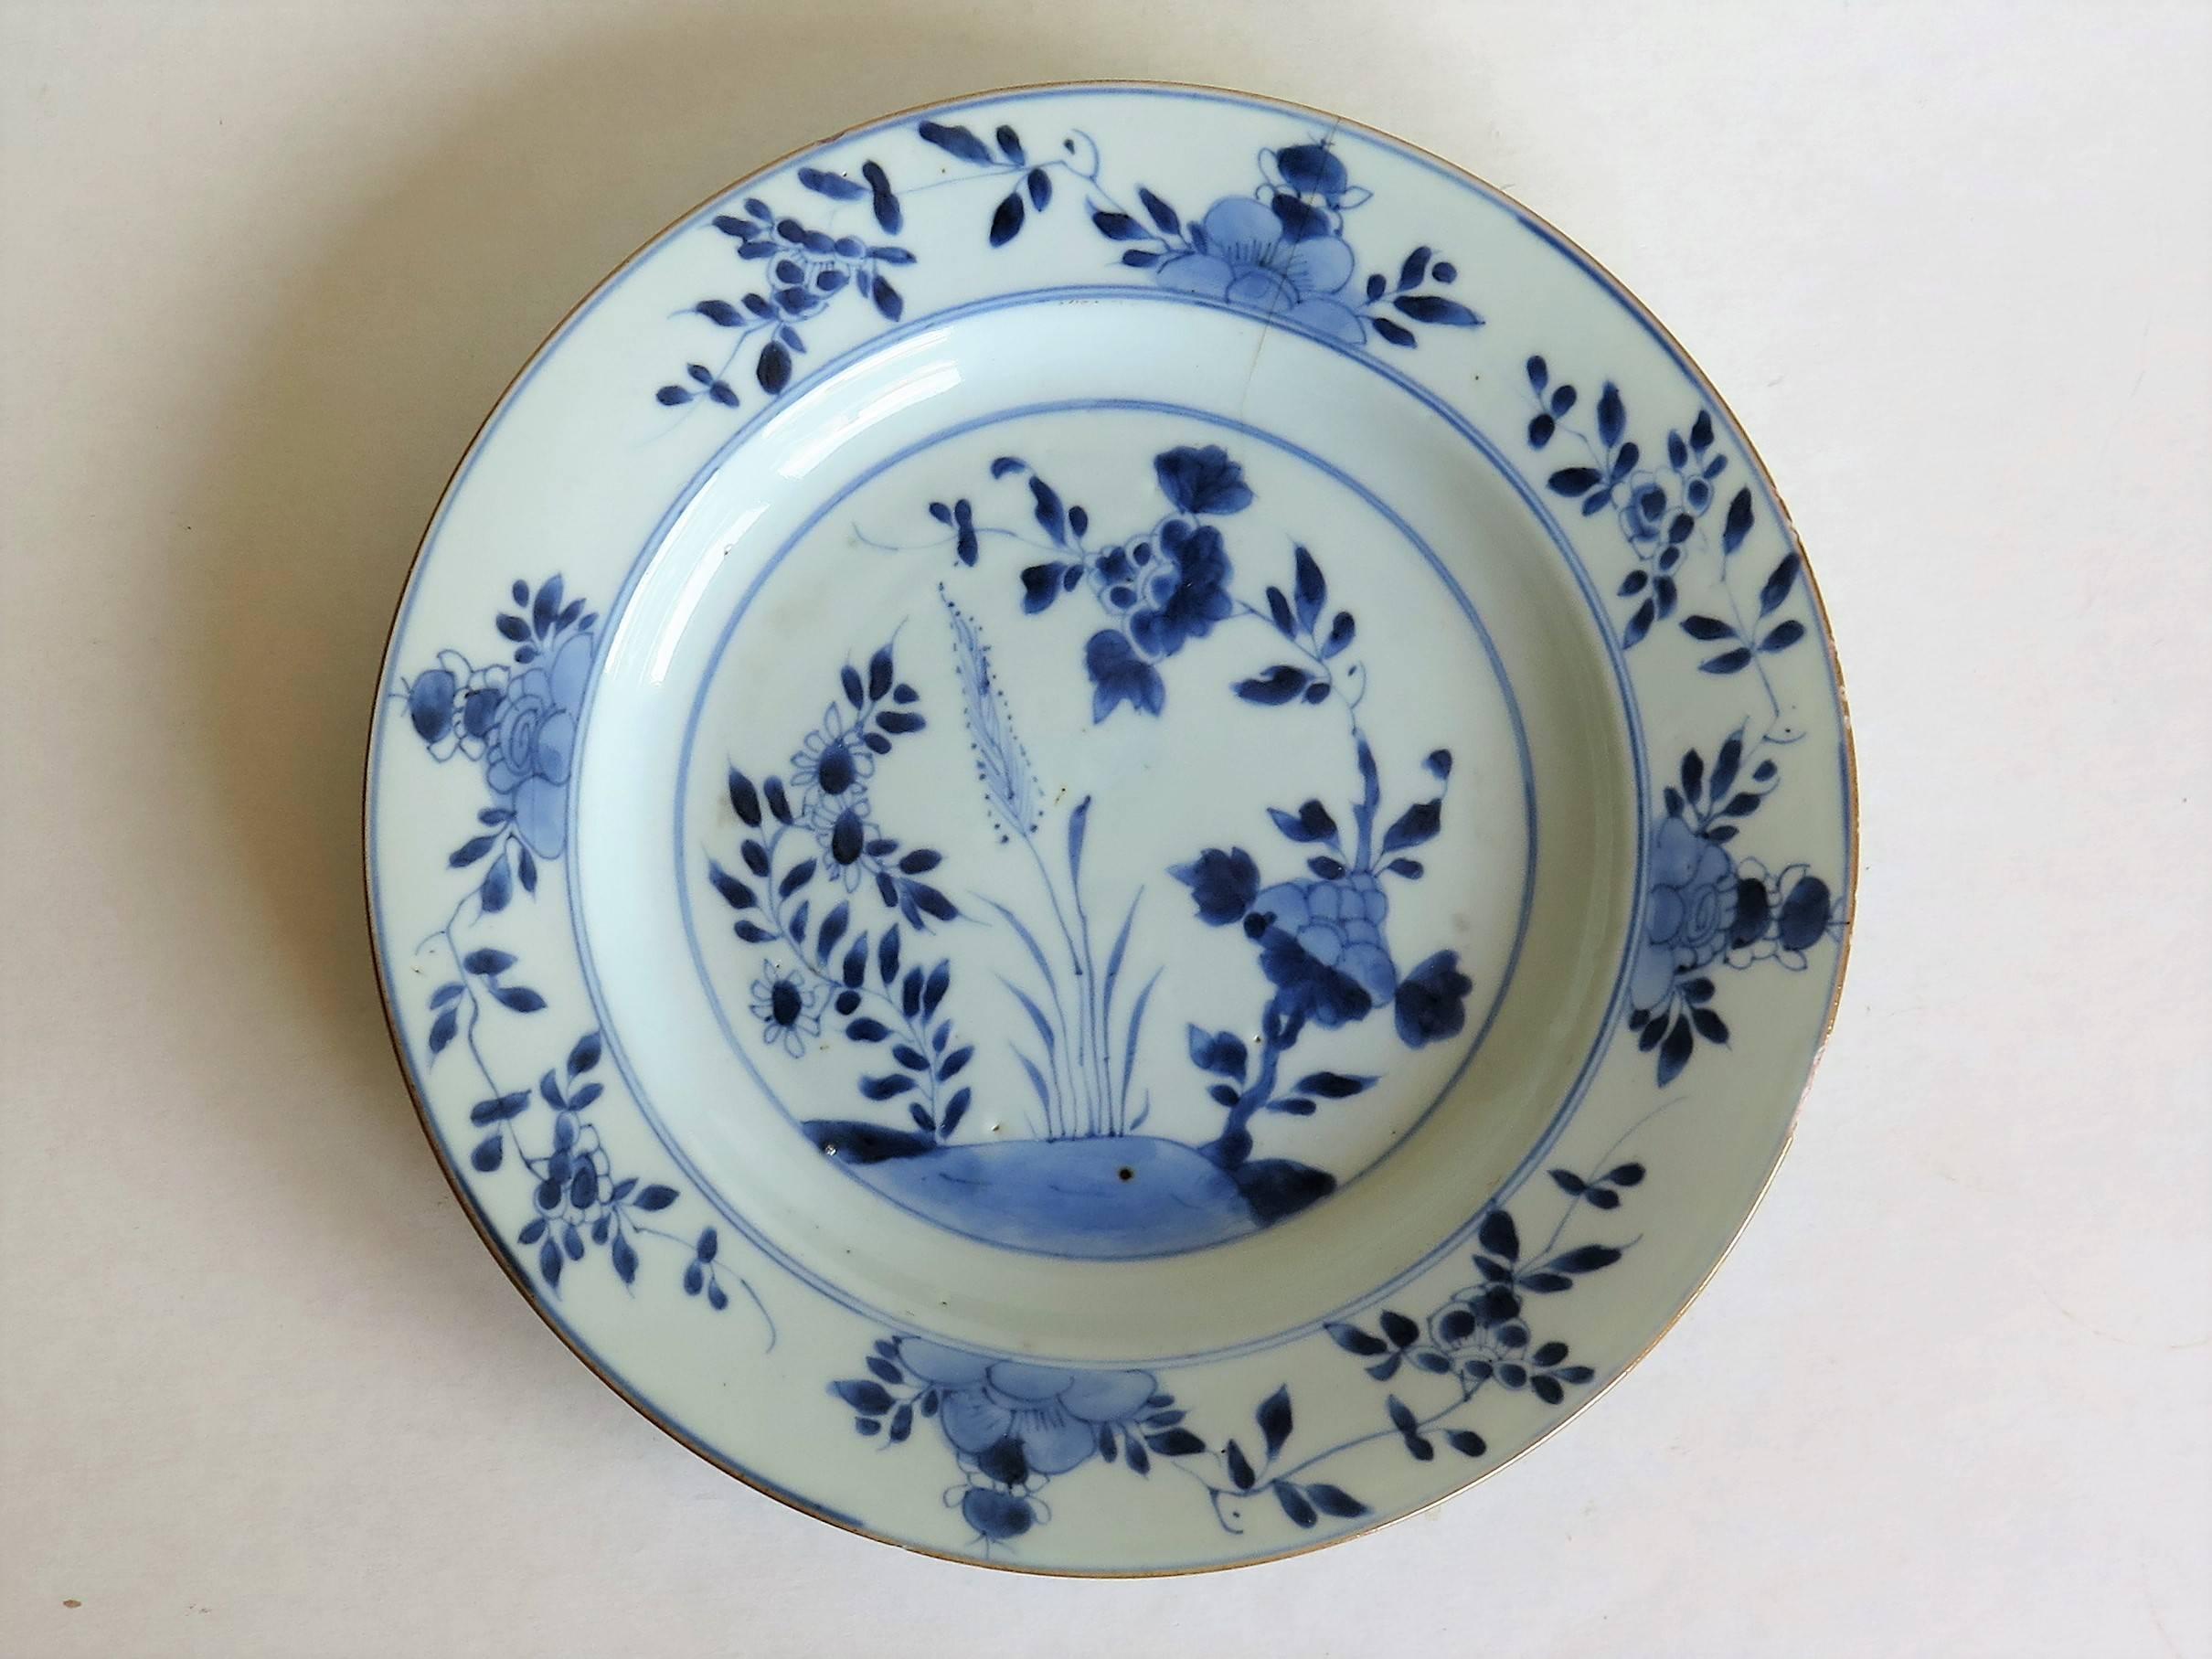 This is a good hand-painted Chinese Export porcelain plate, dating to the early / mid-18th century, circa 1720-1750, Qing dynasty.

The plate is well potted, and has been hand decorated in varying shades of cobalt blue. The glaze is thin and glassy